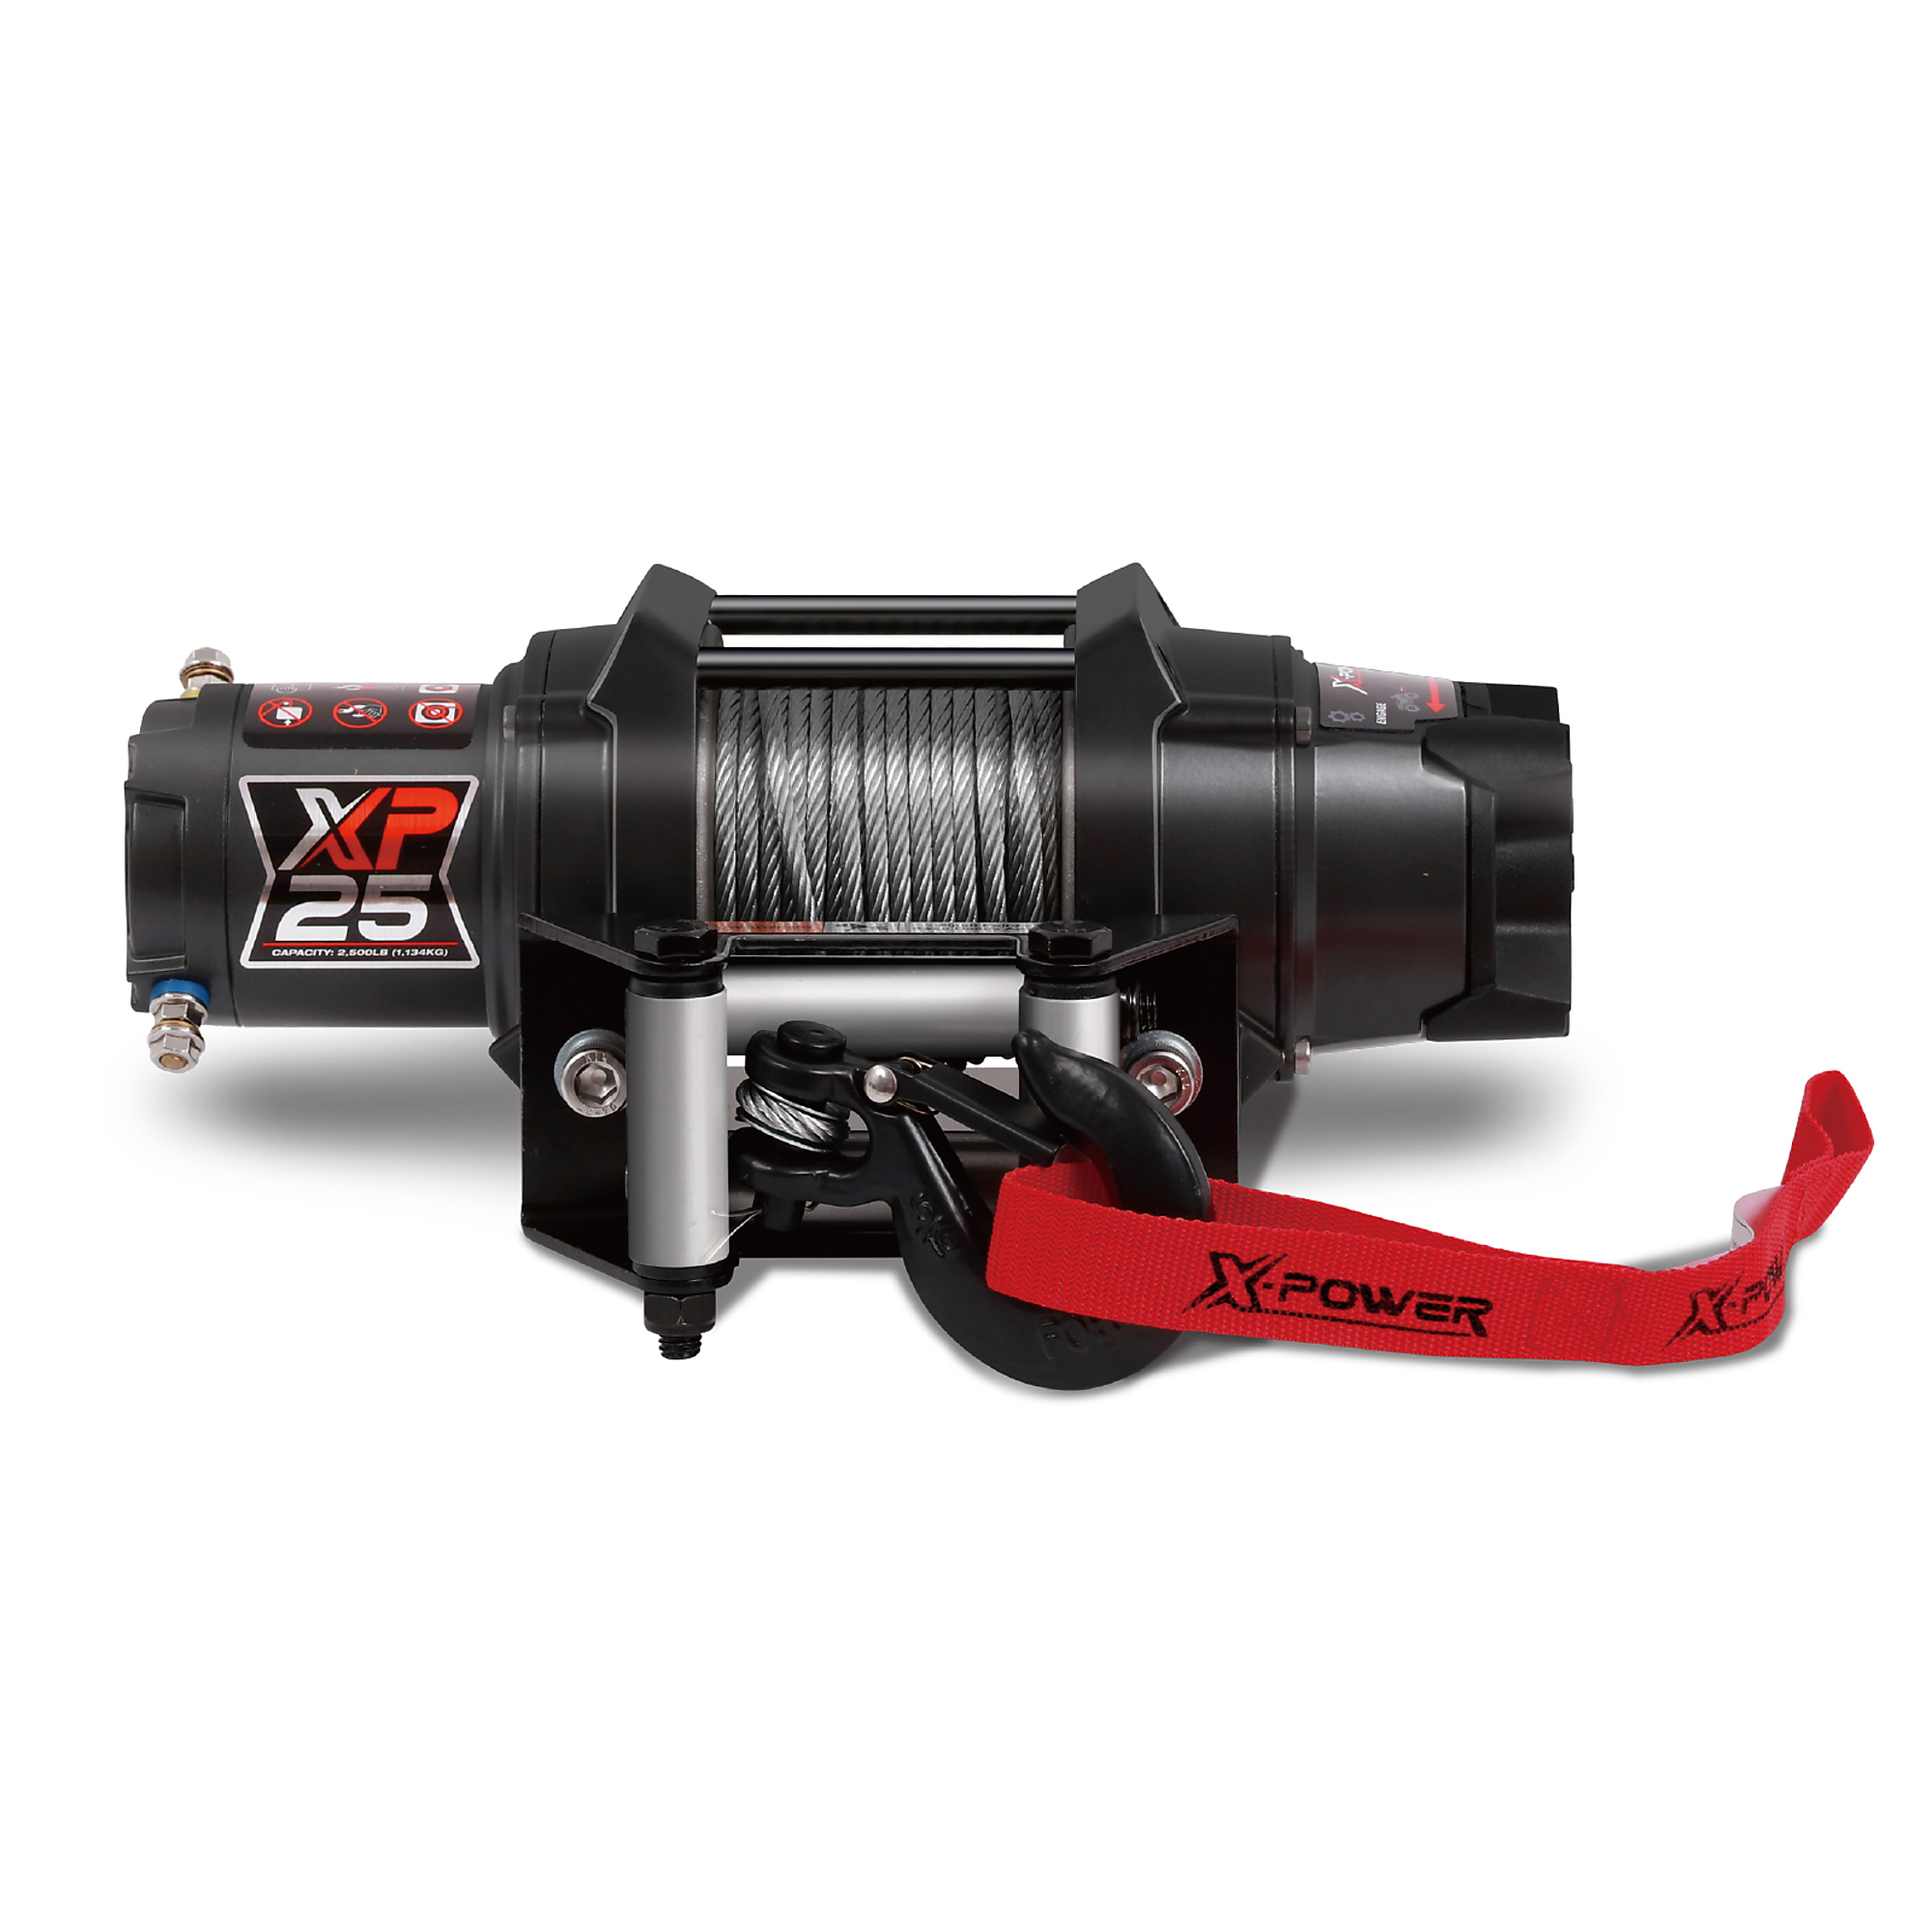 XPower, 2500 LBS. WINCH - STEEL, Capacity (Line Pull) 2500 lb, Model 10802015